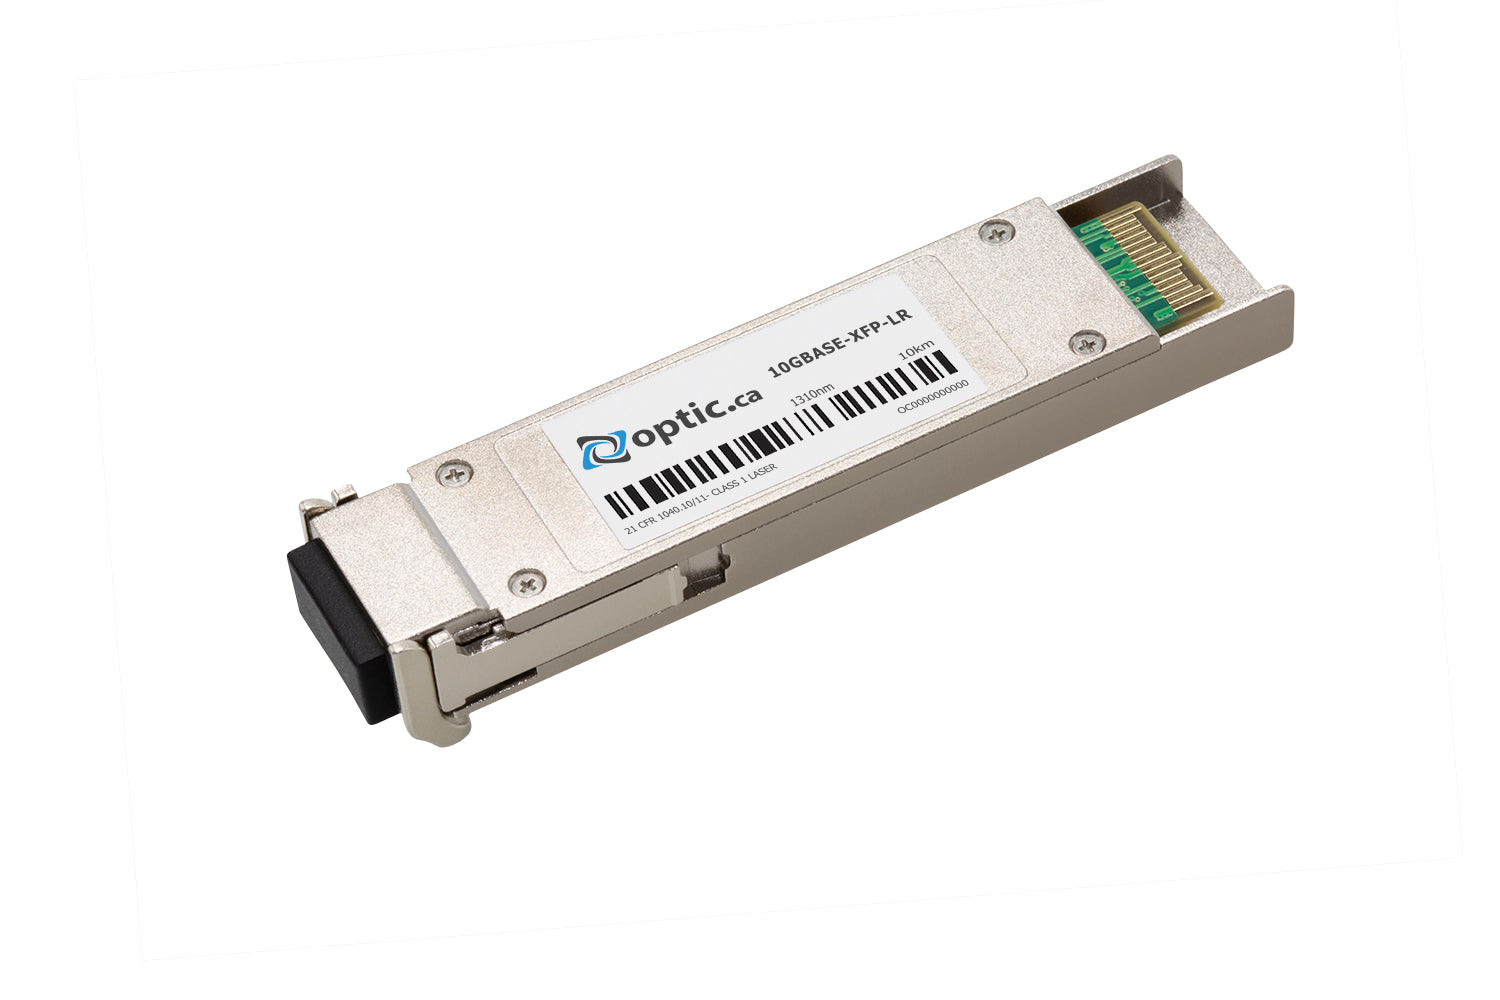 OPTIC.CA - 10GBASE-LR XFP - JD088A-OC - HPE COMPATIBLE